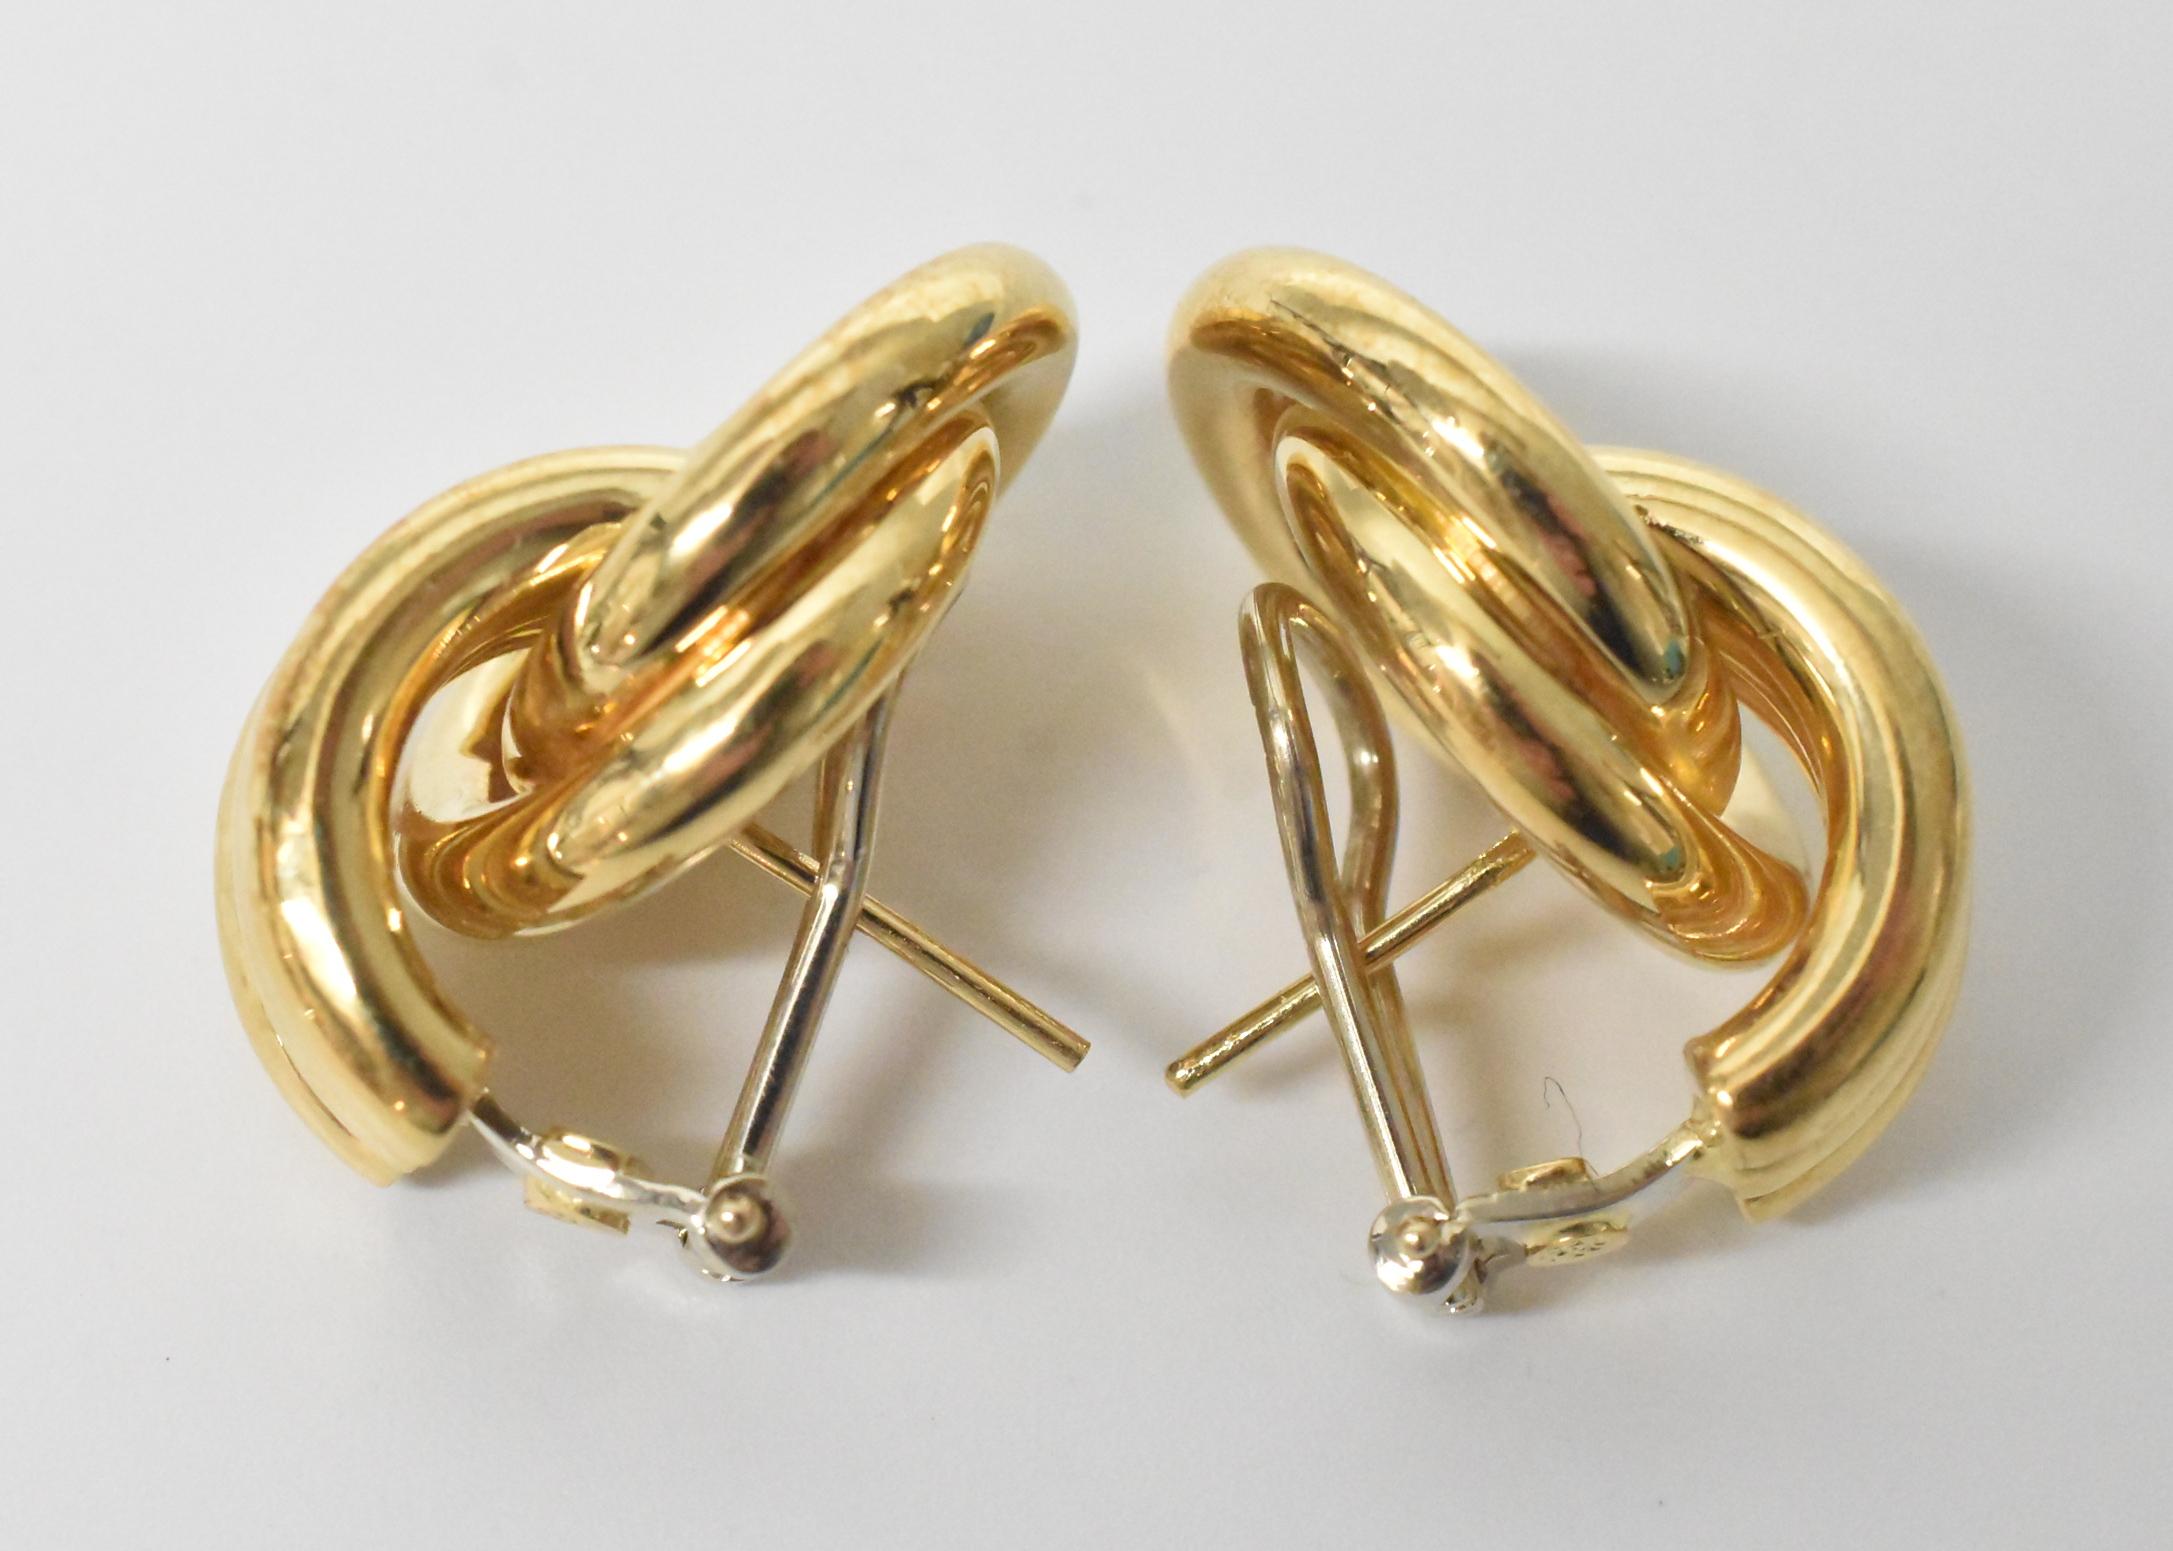 Pair of 18K gold earrings by Italian jeweler Nicolis Cola, knot style, pierced with Omega back, Cola's hallmark, stamped 166 VI. Very good condition. Dimensions: 1